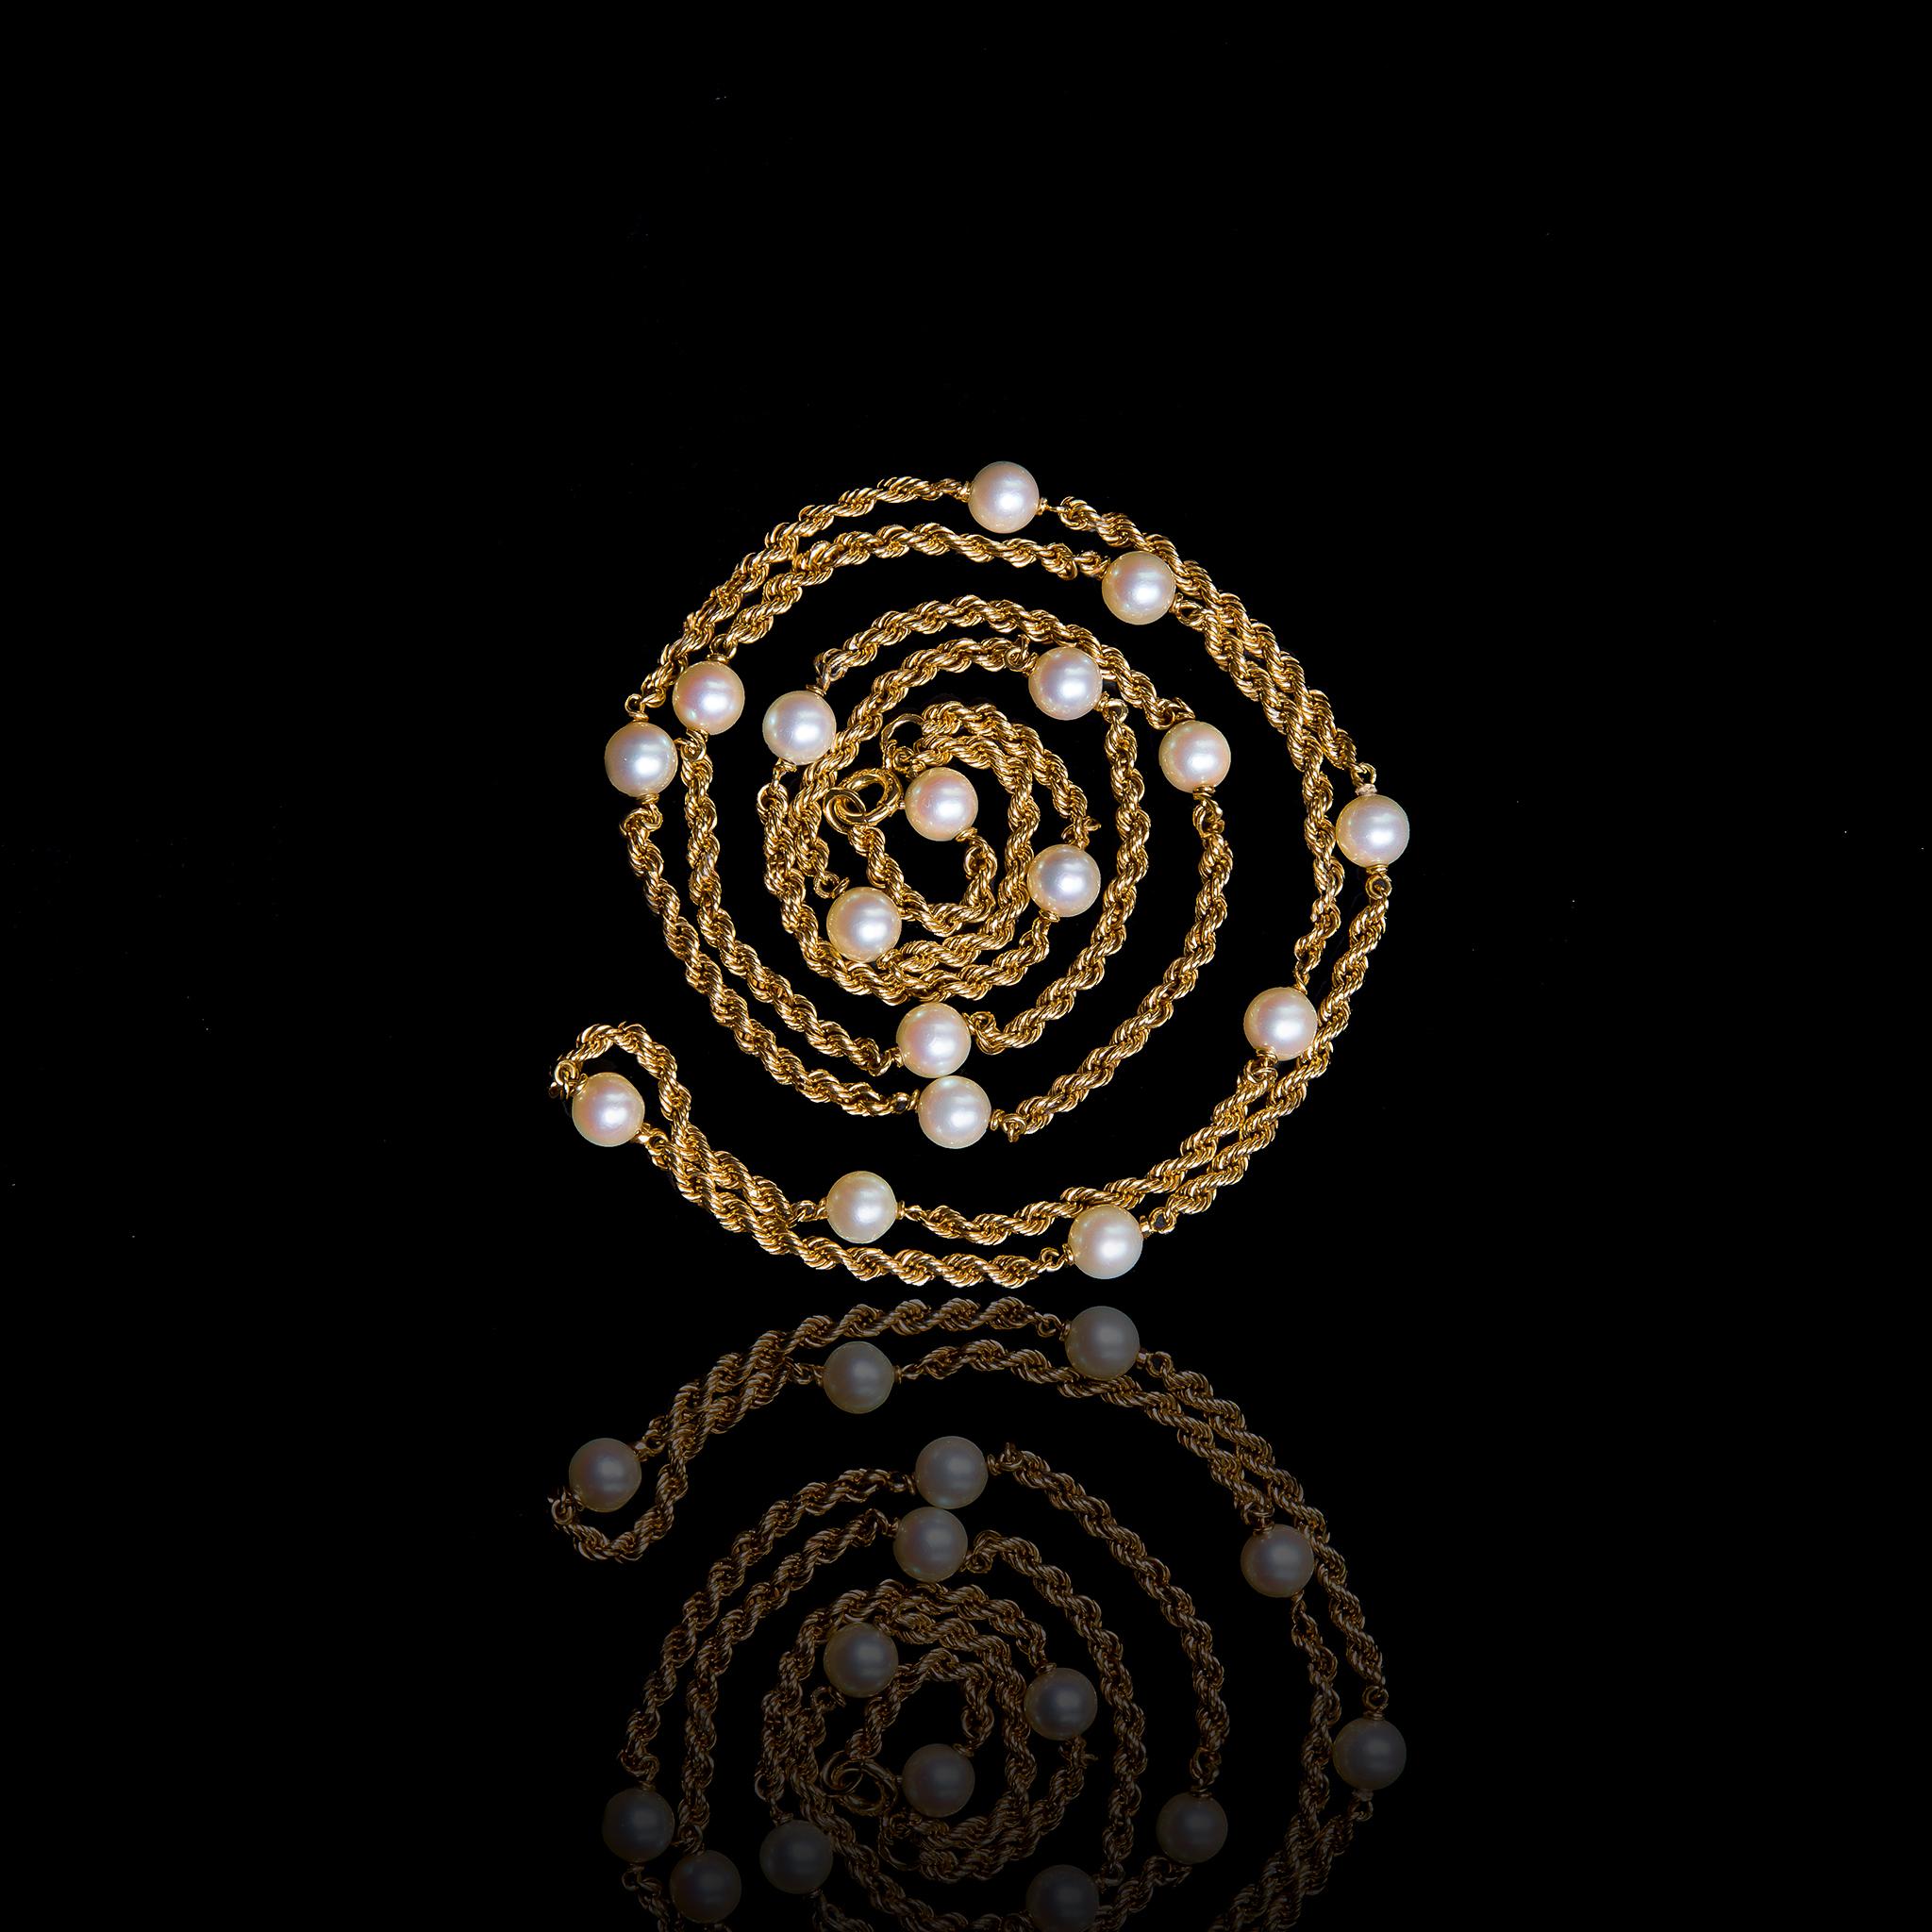 Van Cleef & Arpels 1970s Neclace in 18 carats gold and 17 white pearls from Japan.

-Lenght: 80cm.
-Signed :V-C-A.
-Numberded: B 40 44 P 66.
